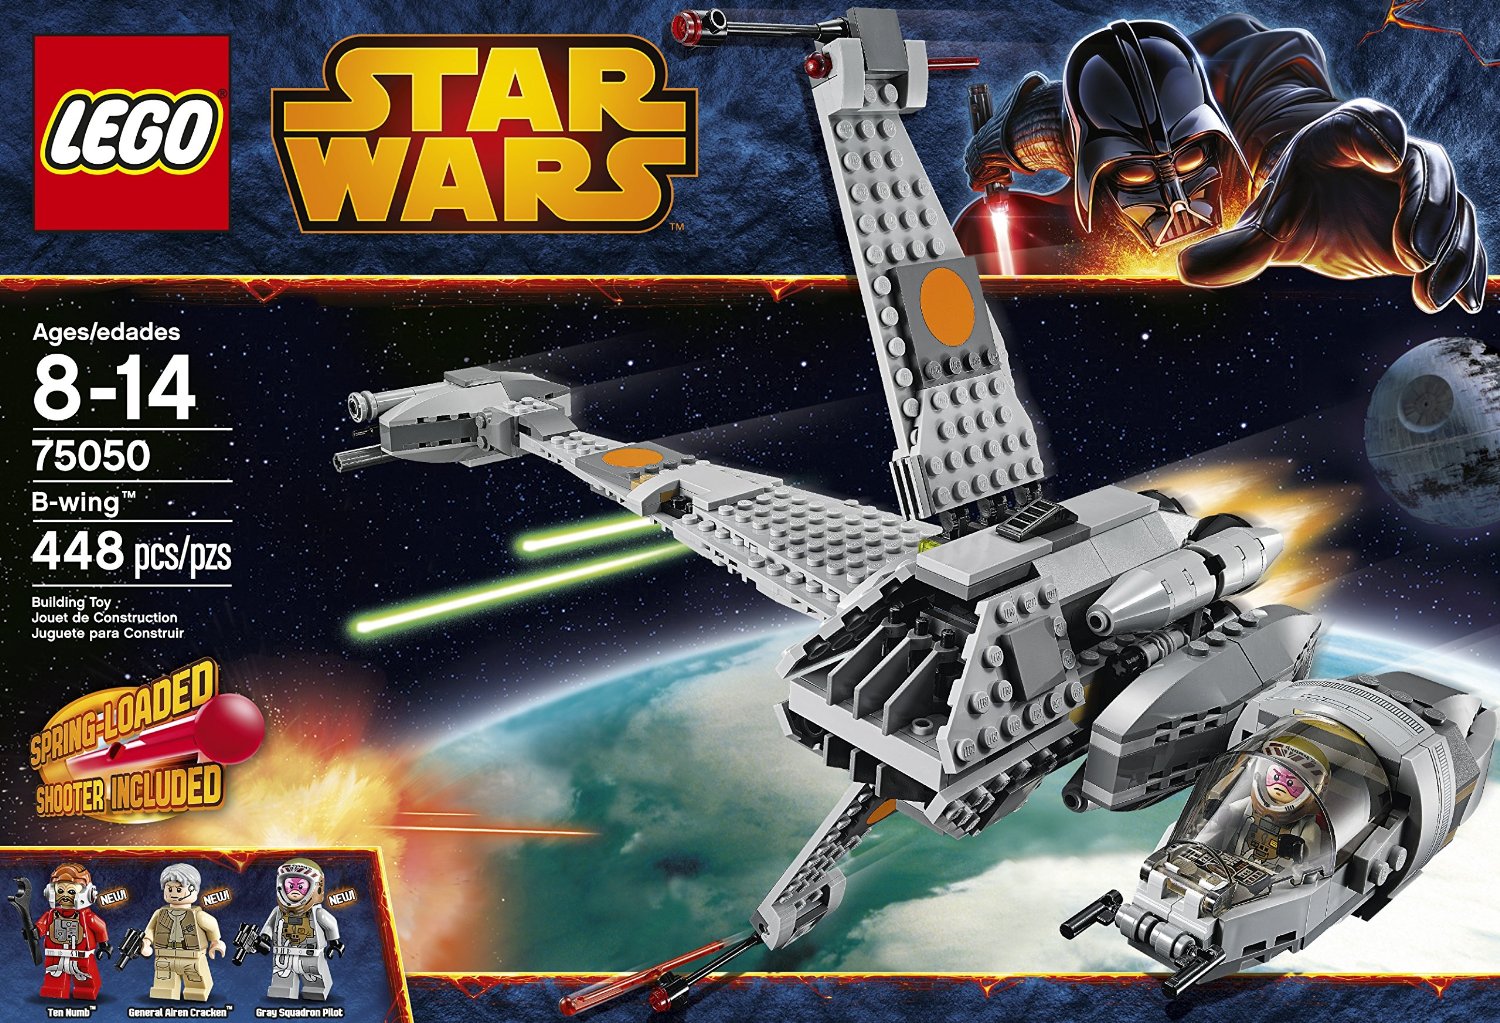 Amazon Discounts Several LEGO Star Wars Sets up to 20% - FBTB